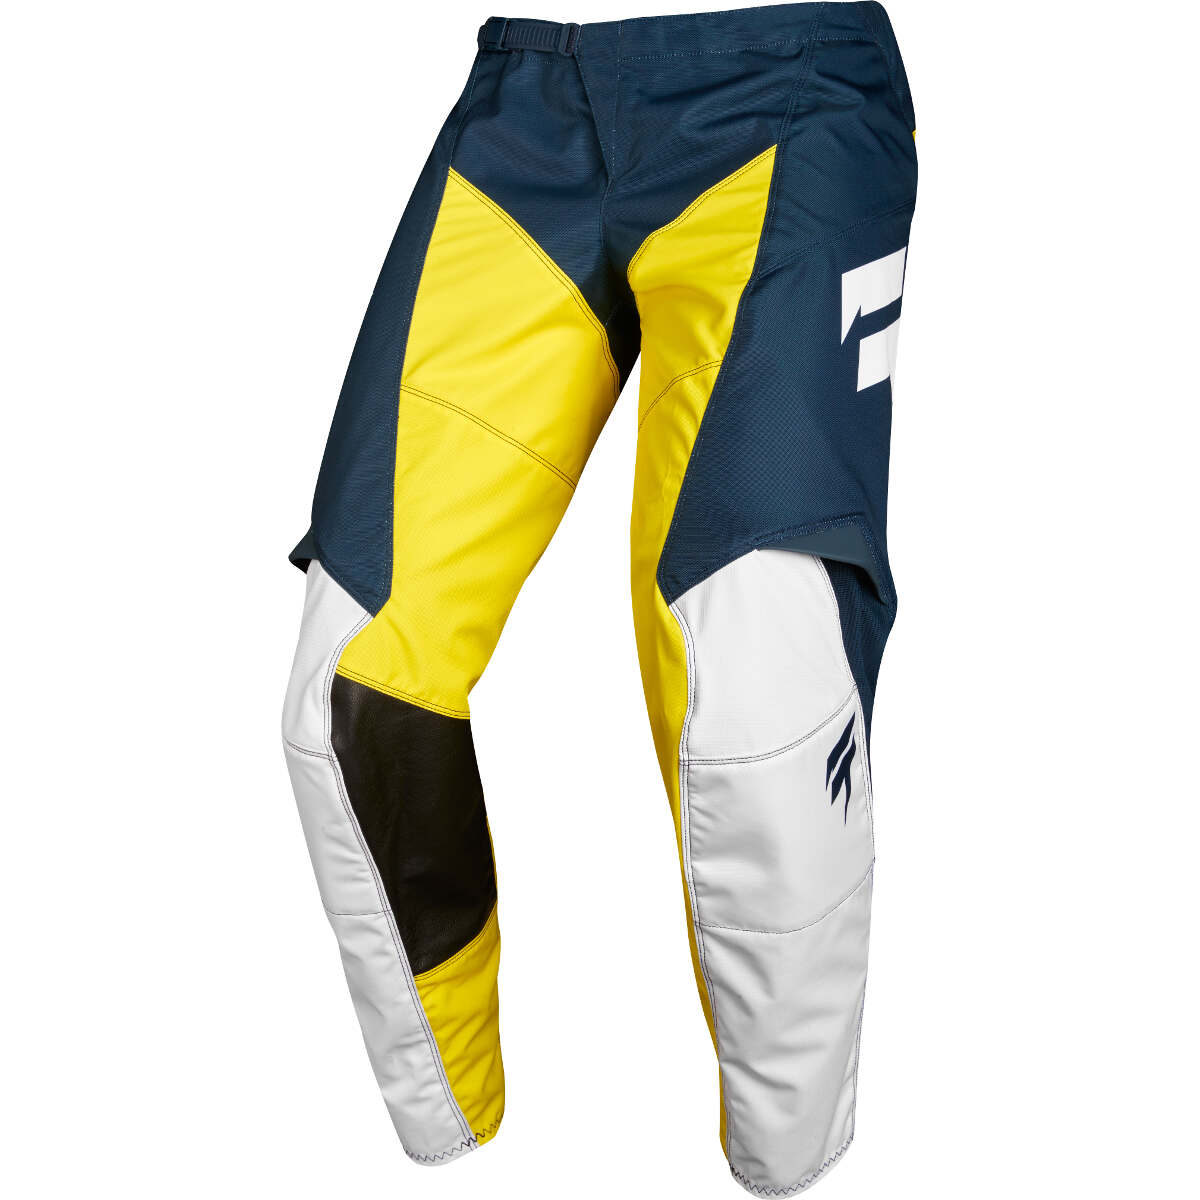 Shift MX Pants Whit3 Label Navy/Yellow - Limited Edition GP